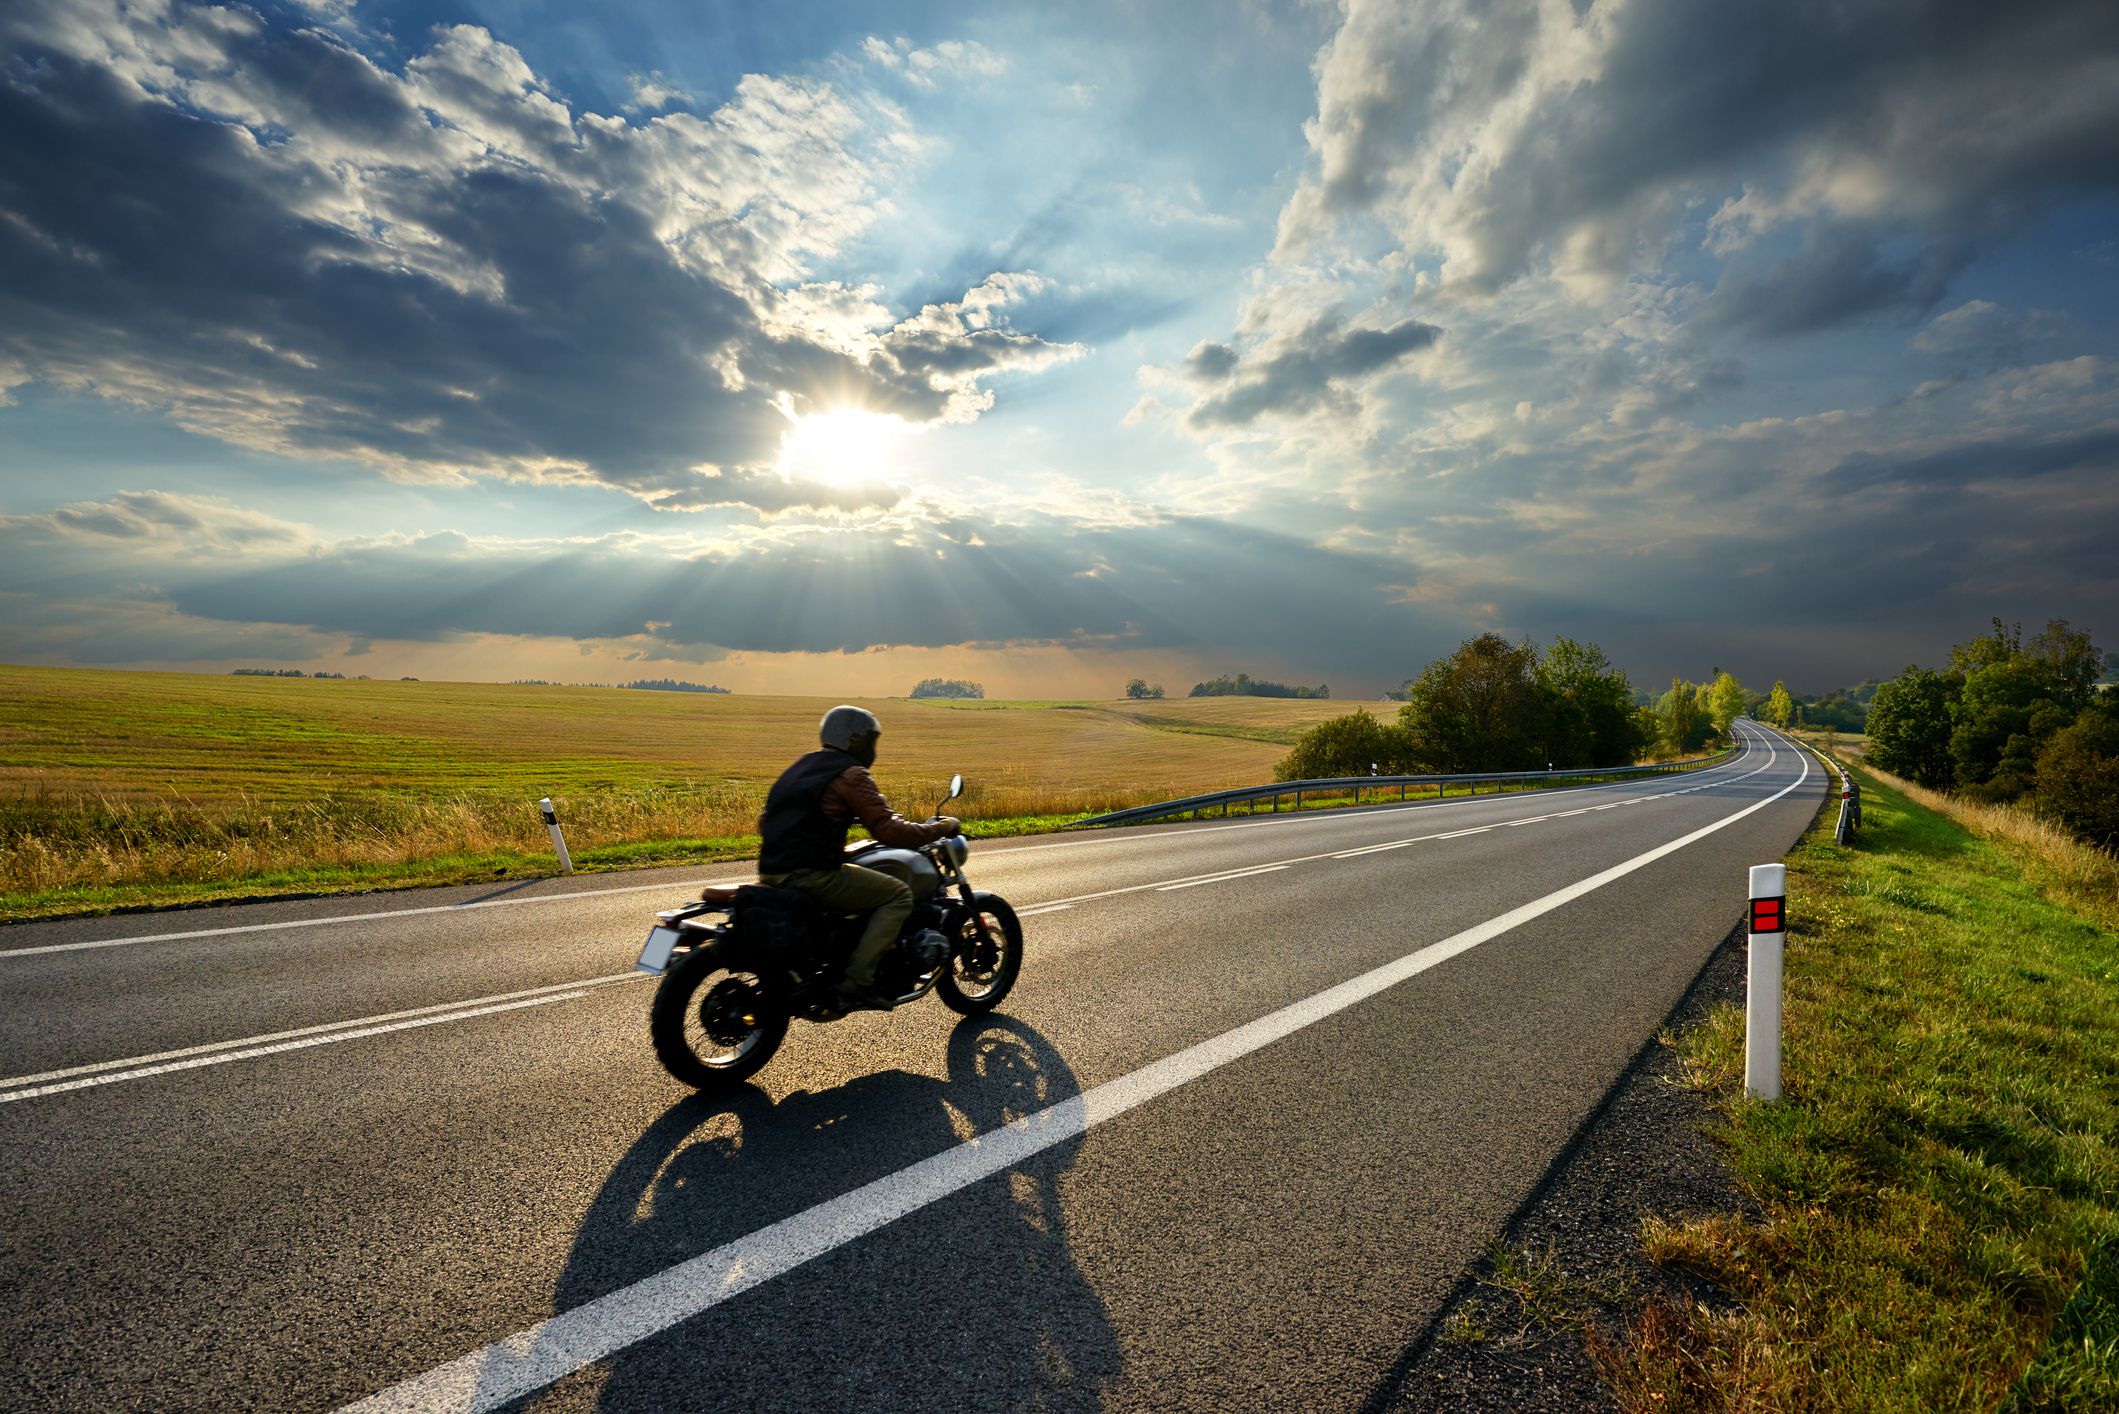 <p>What makes a road great for motorcyclists? Depending who you ask, it could be scenery, skill-testing twists and turns, or diversions such as historic sites and museums of <a href="https://blog.cheapism.com/greatest-motorcycles/">iconic bikes</a> that can turn a day of riding into the highlight of a longer trip. We spoke to avid riders and combed sites including <a href="https://www.motorcycleroads.com/">MotorcycleRoads.com</a> to find some of the nation's best routes to explore on two wheels.</p><p><b>Related:</b> <a href="https://blog.cheapism.com/buy-motorcycle/">The Best Motorcycles for Weekend Warriors</a></p>